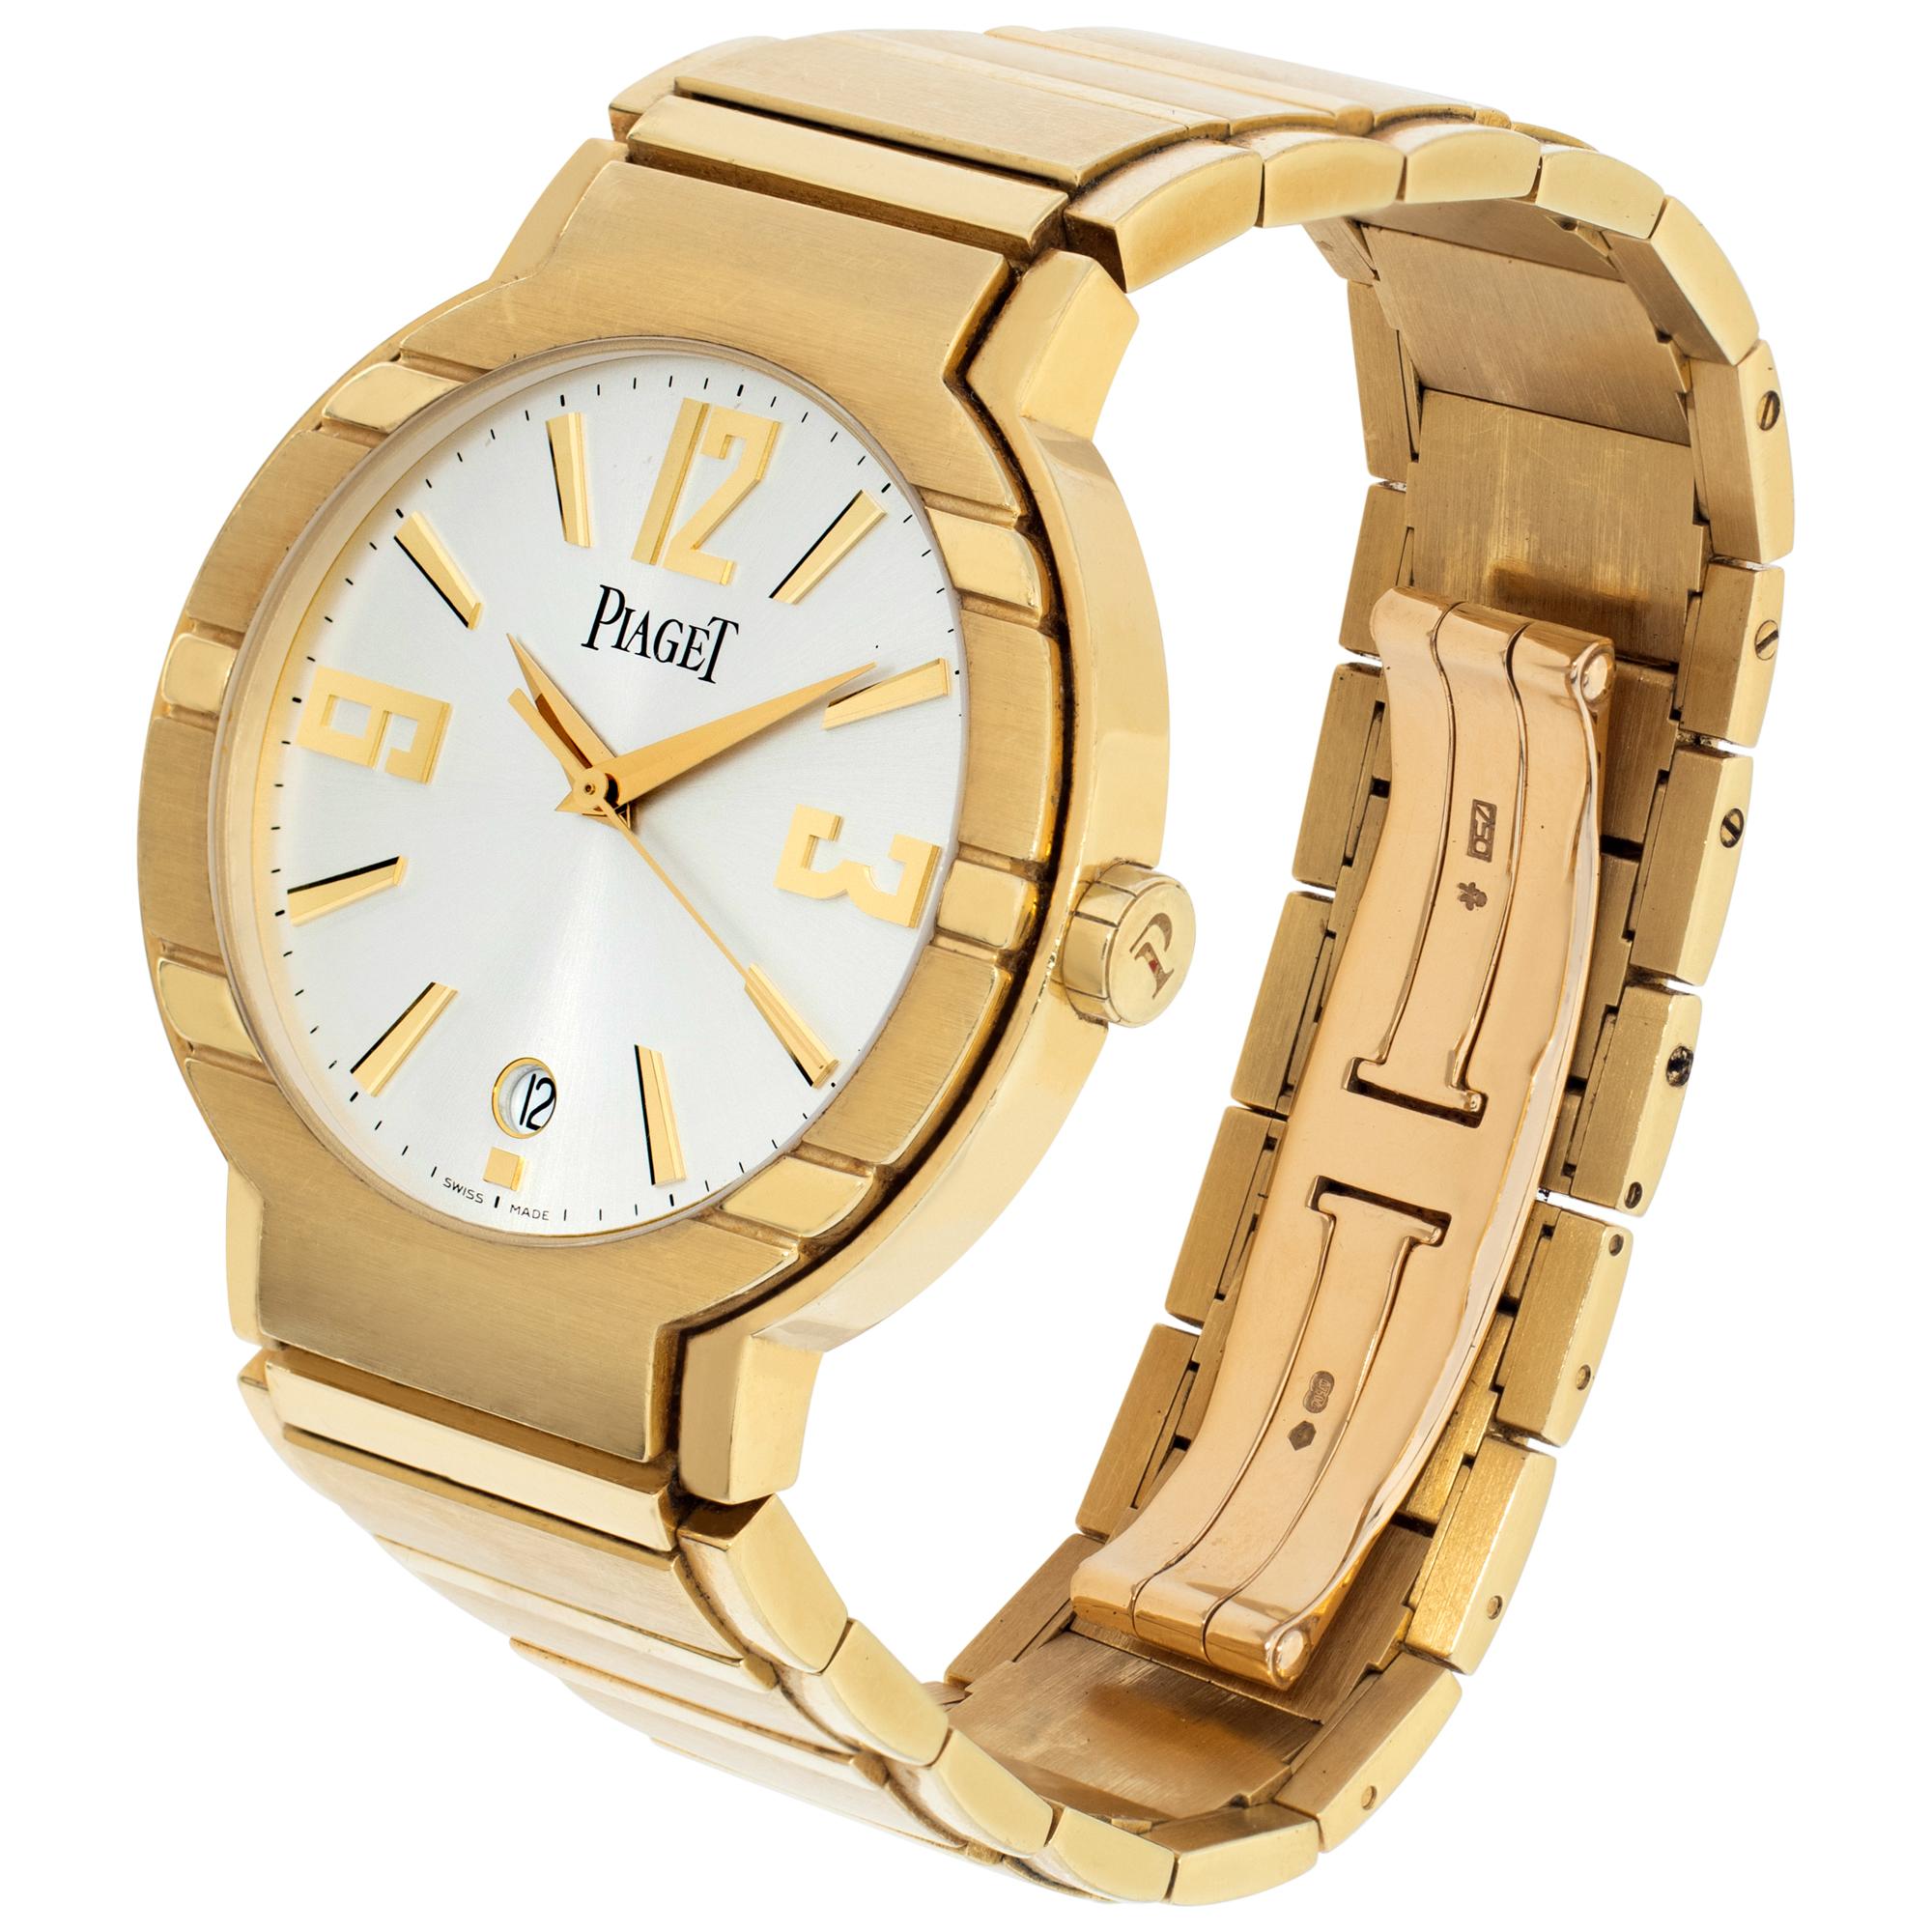 Piaget Polo in 18k yellow gold with white arabic and stick dial. Auto w/ sweep seconds and date. 38 mm case size. With box and papers. Ref GOA26021. Circa 2000s. Fine Pre-owned Piaget Watch. Certified preowned Dress Piaget Polo GOA26021 watch is